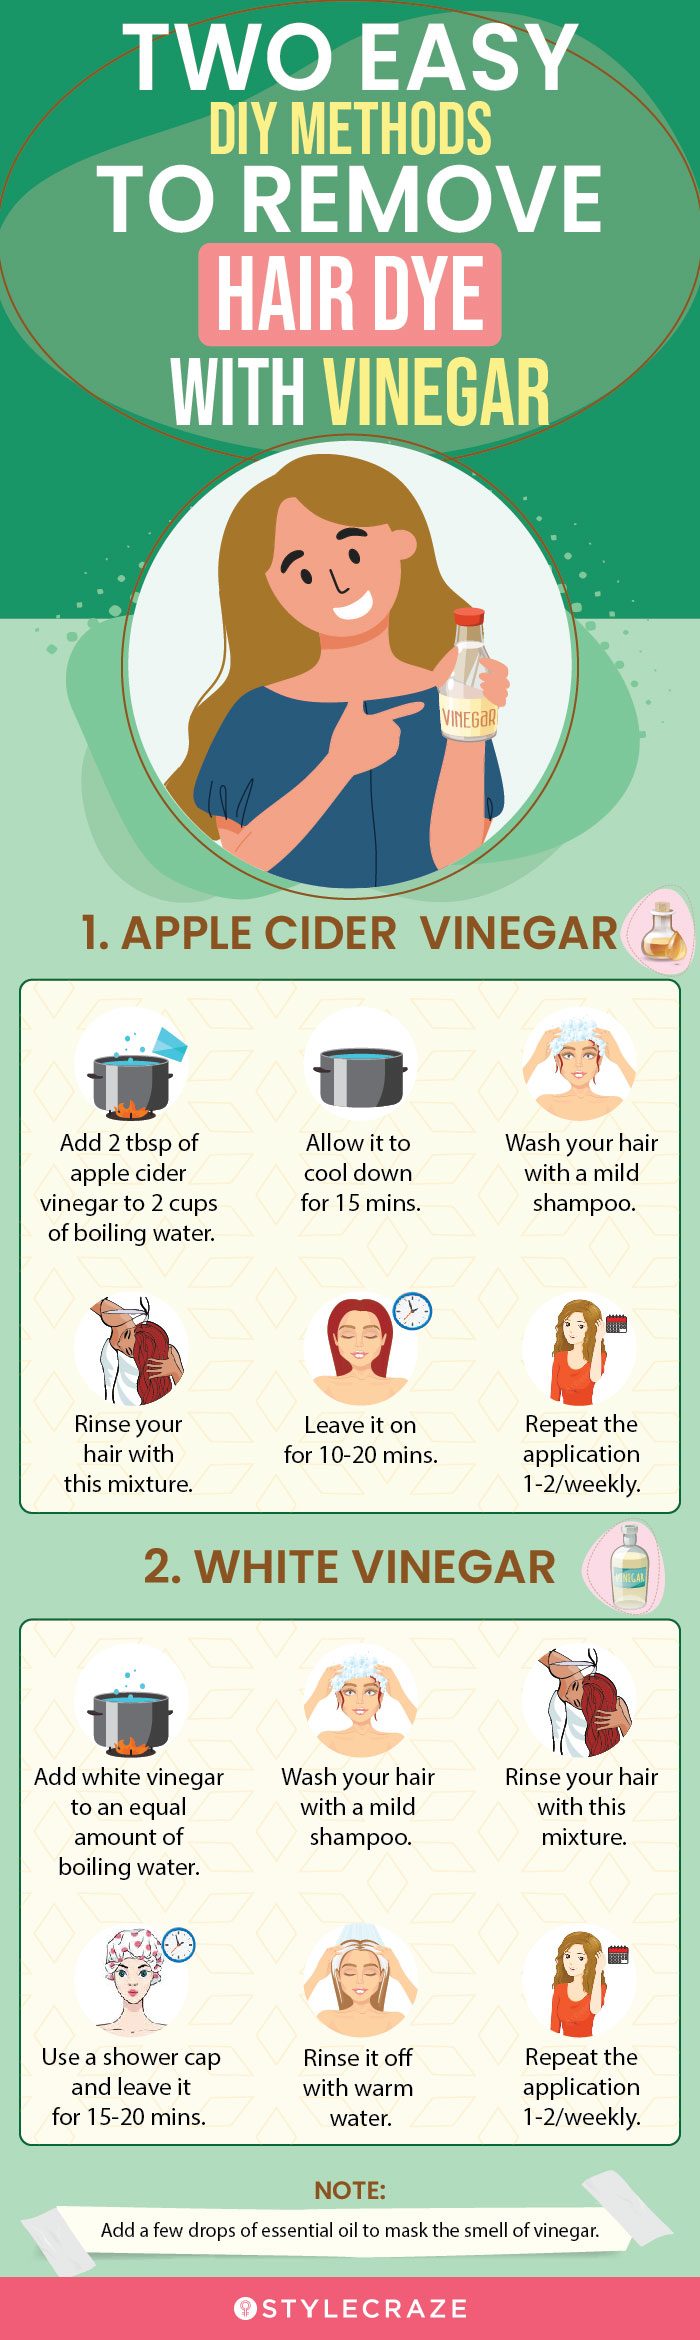 two easy diy methods to remove hair dye with vinegar (infographic)